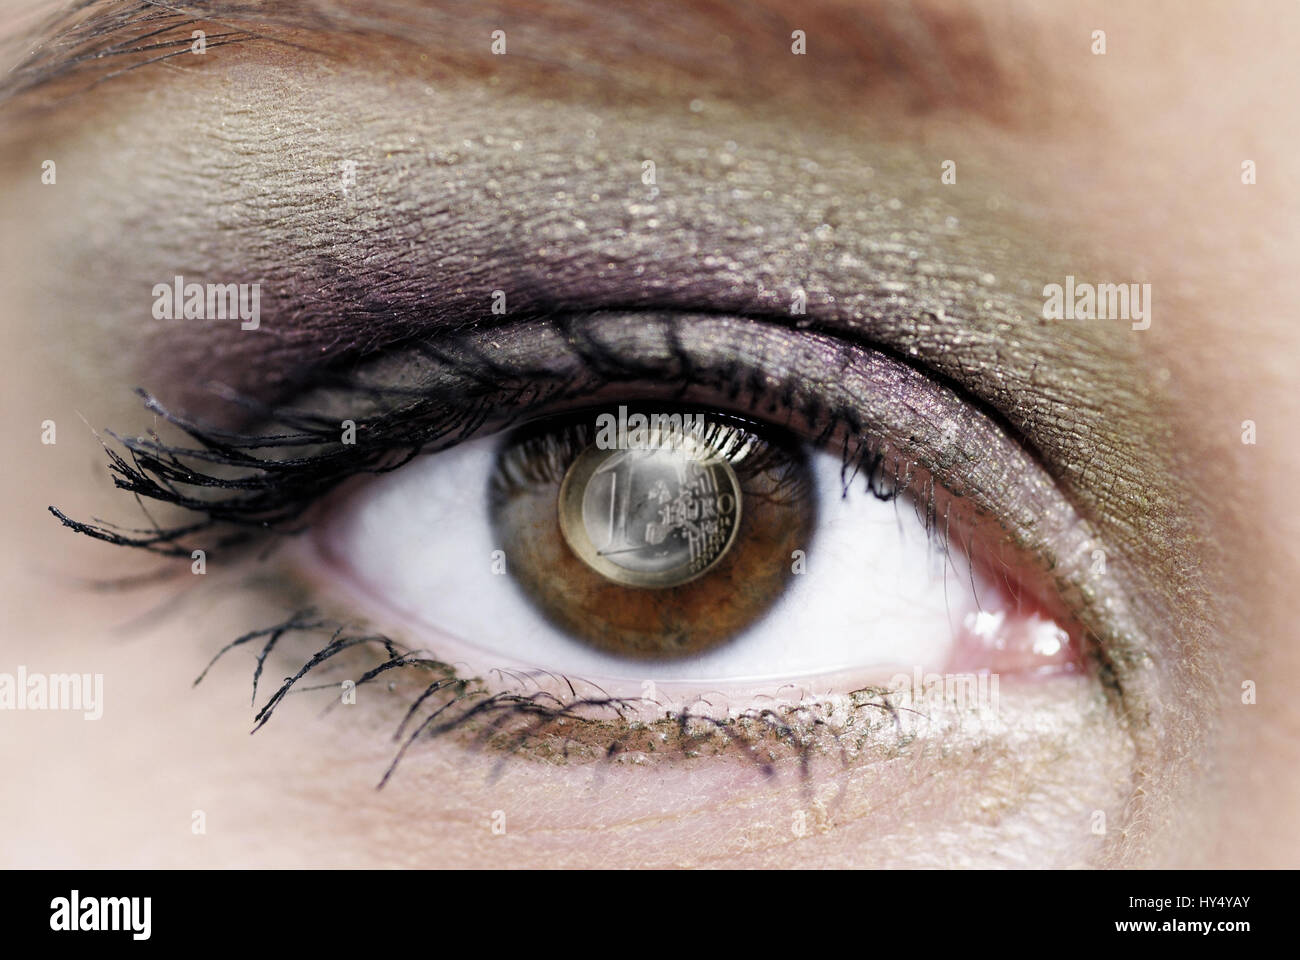 Eye of a woman with 1-euro-coin, Auge einer Frau mit 1-Euro-Muenze Stock Photo